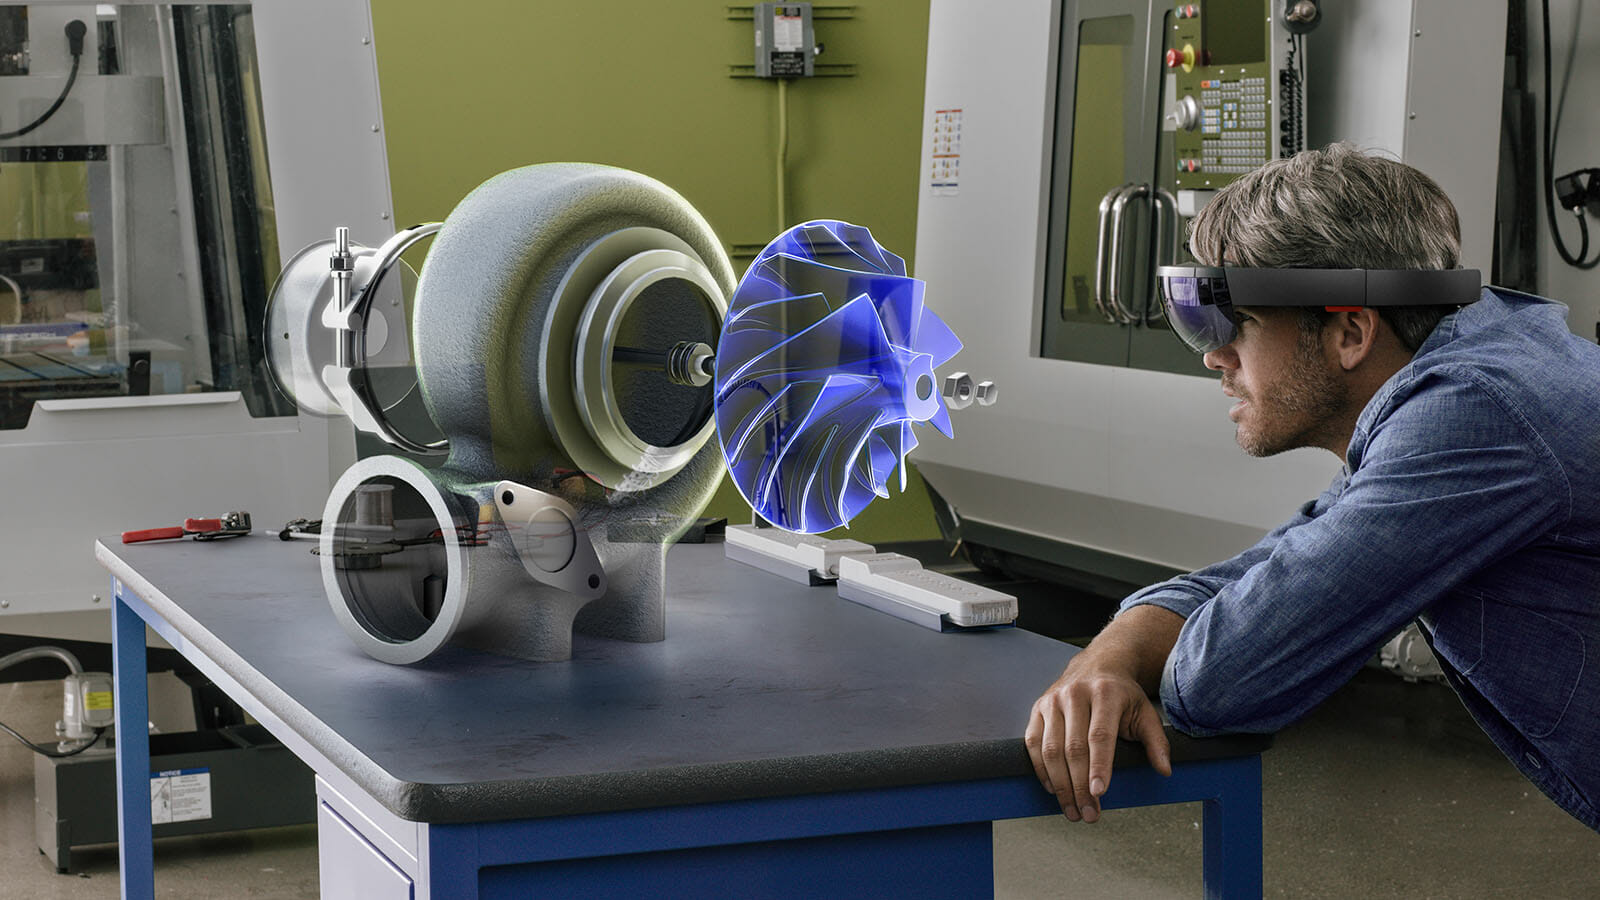 You are currently viewing Microsoft HoloLens is now certified protective eyewear